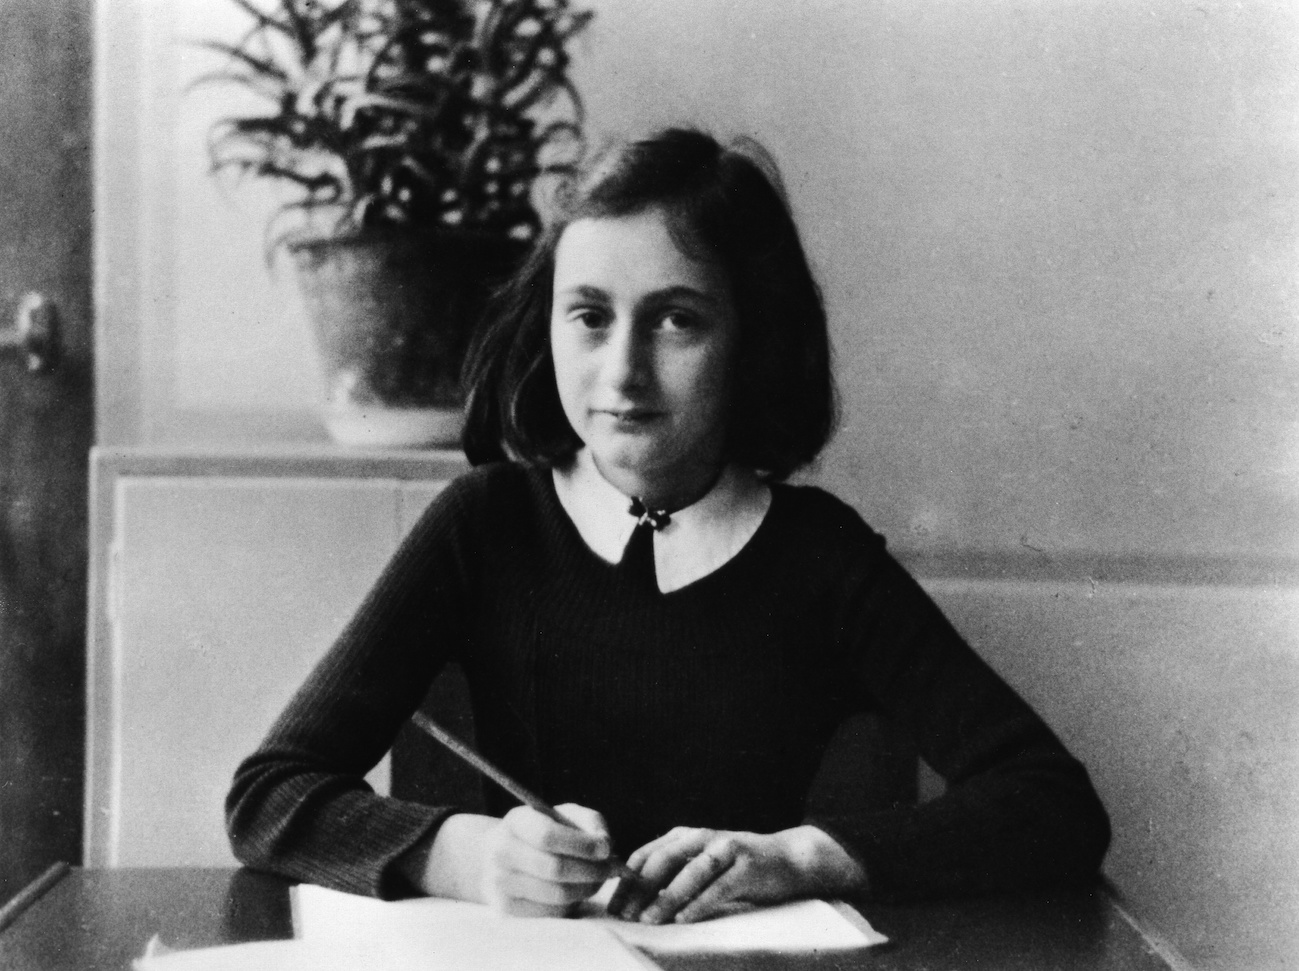 Anne Frank in 1941